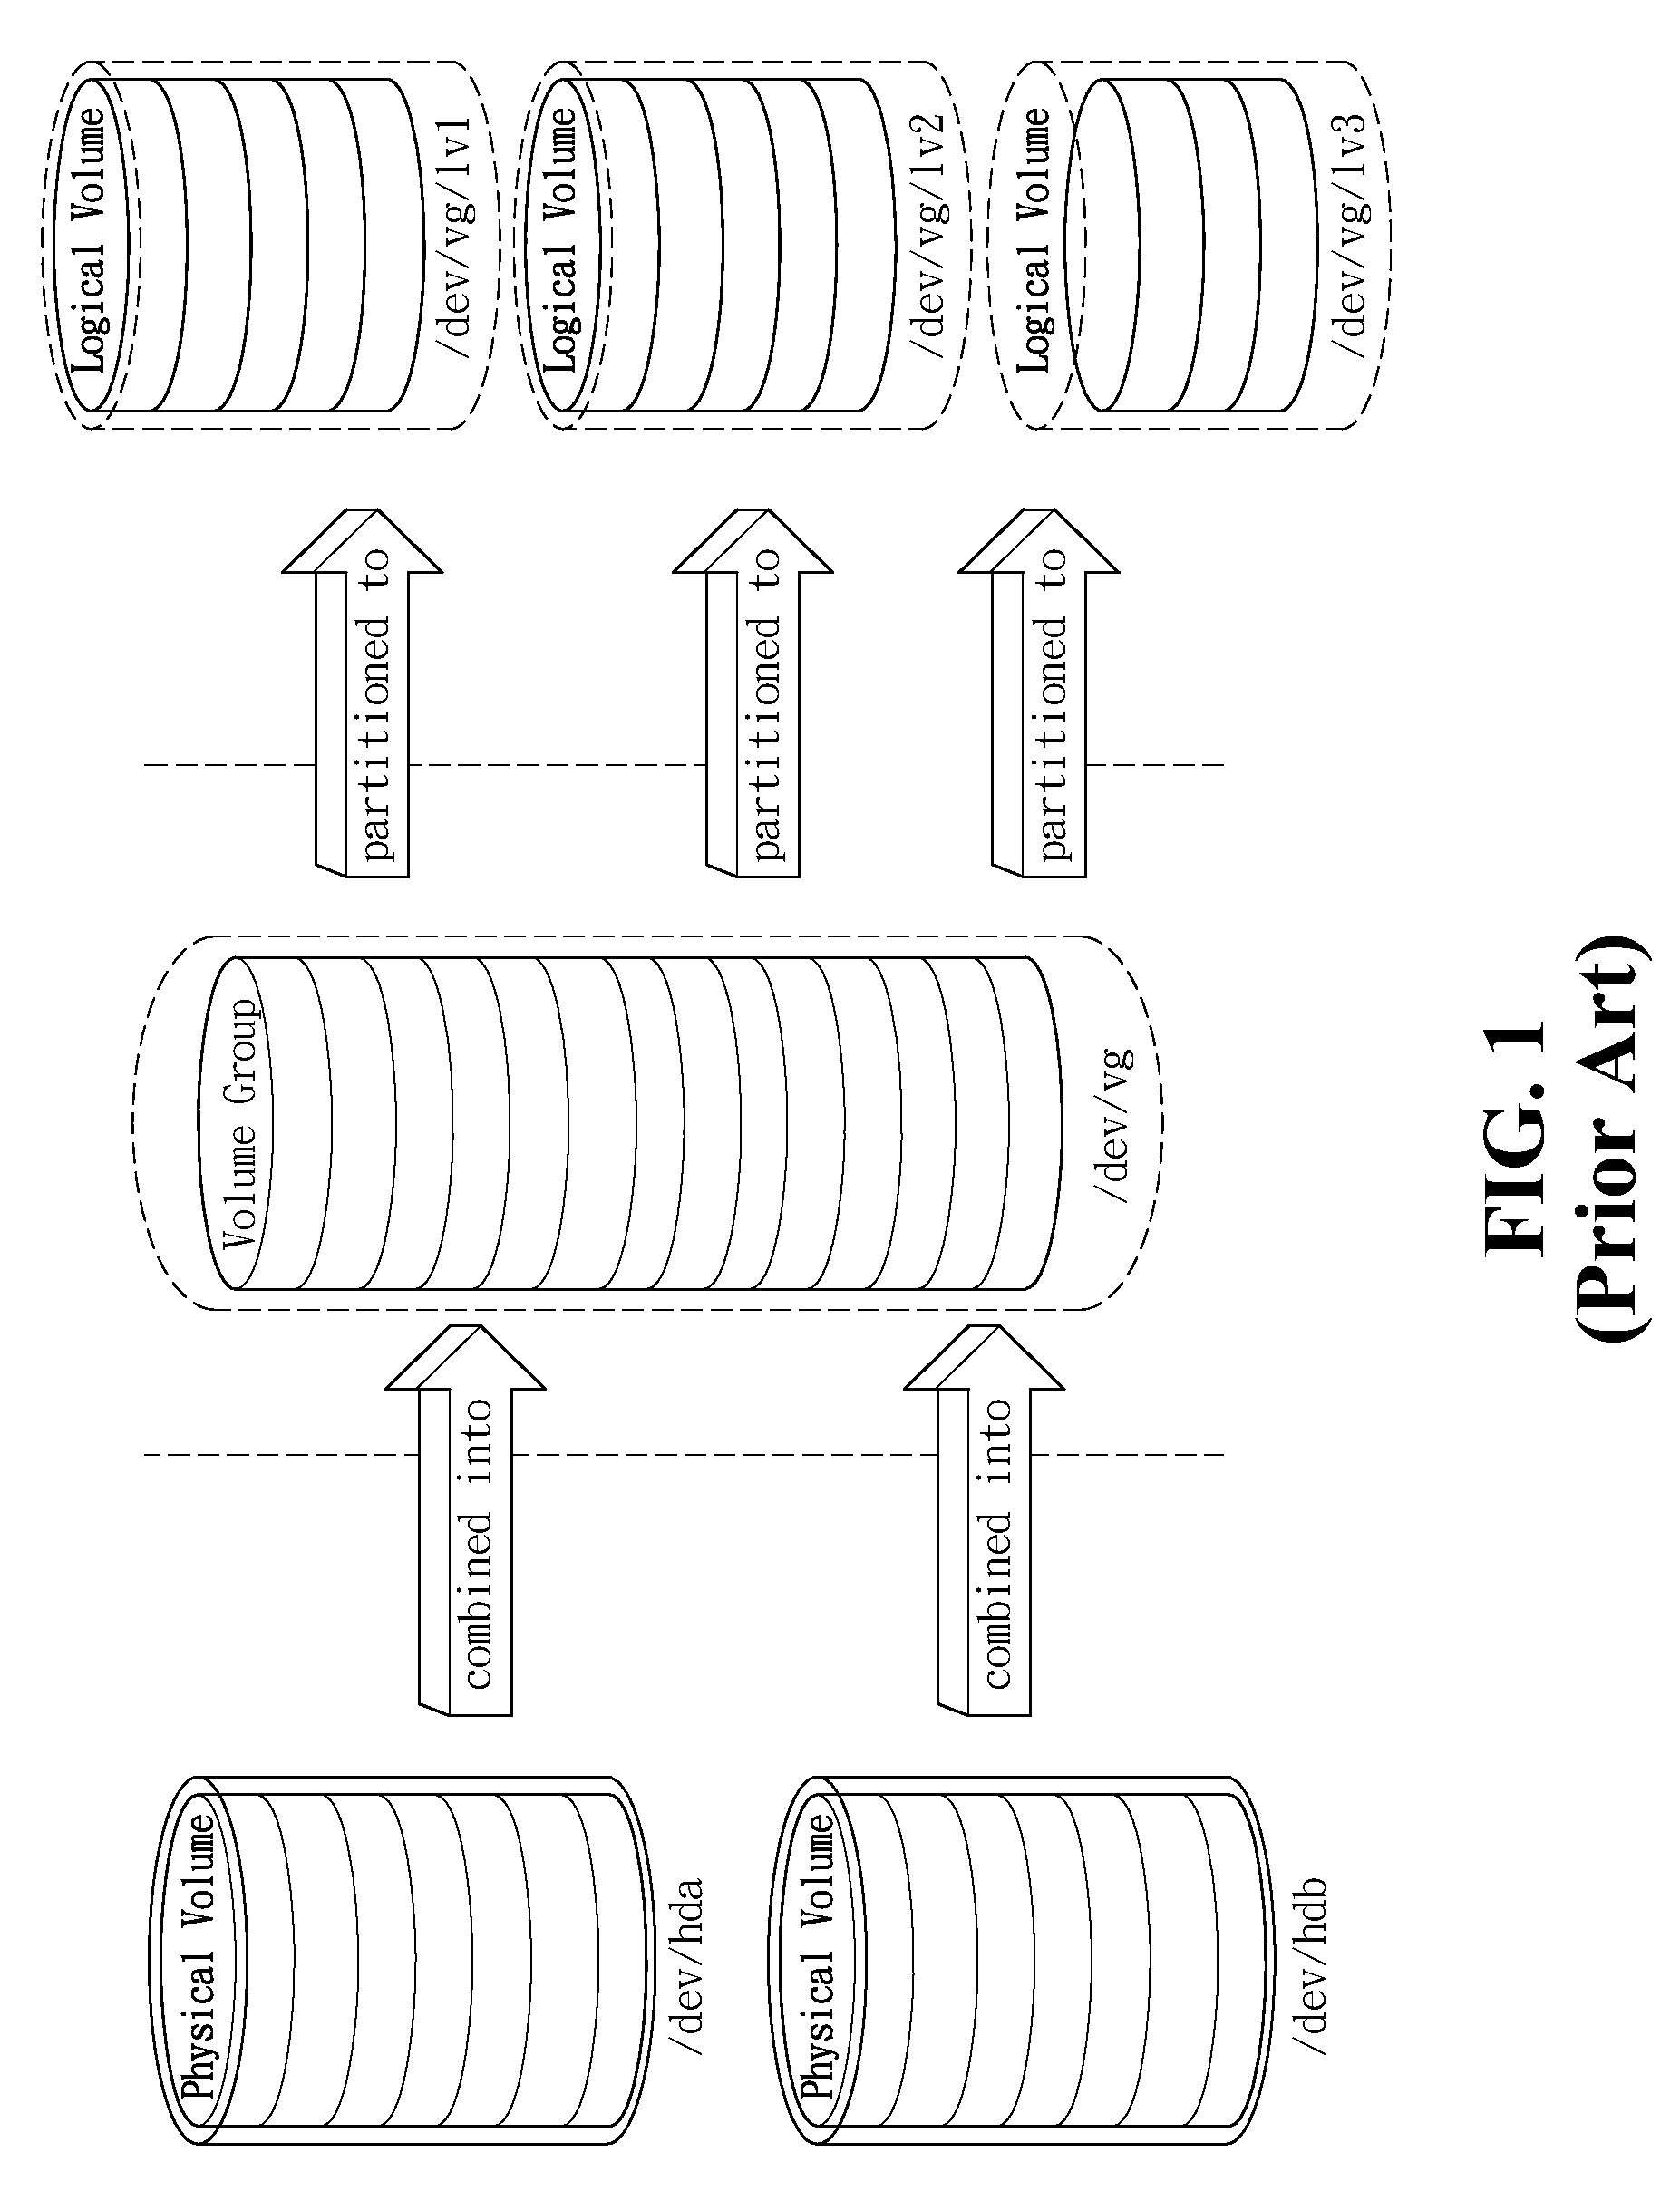 System and method for remote mirror data backup over a network